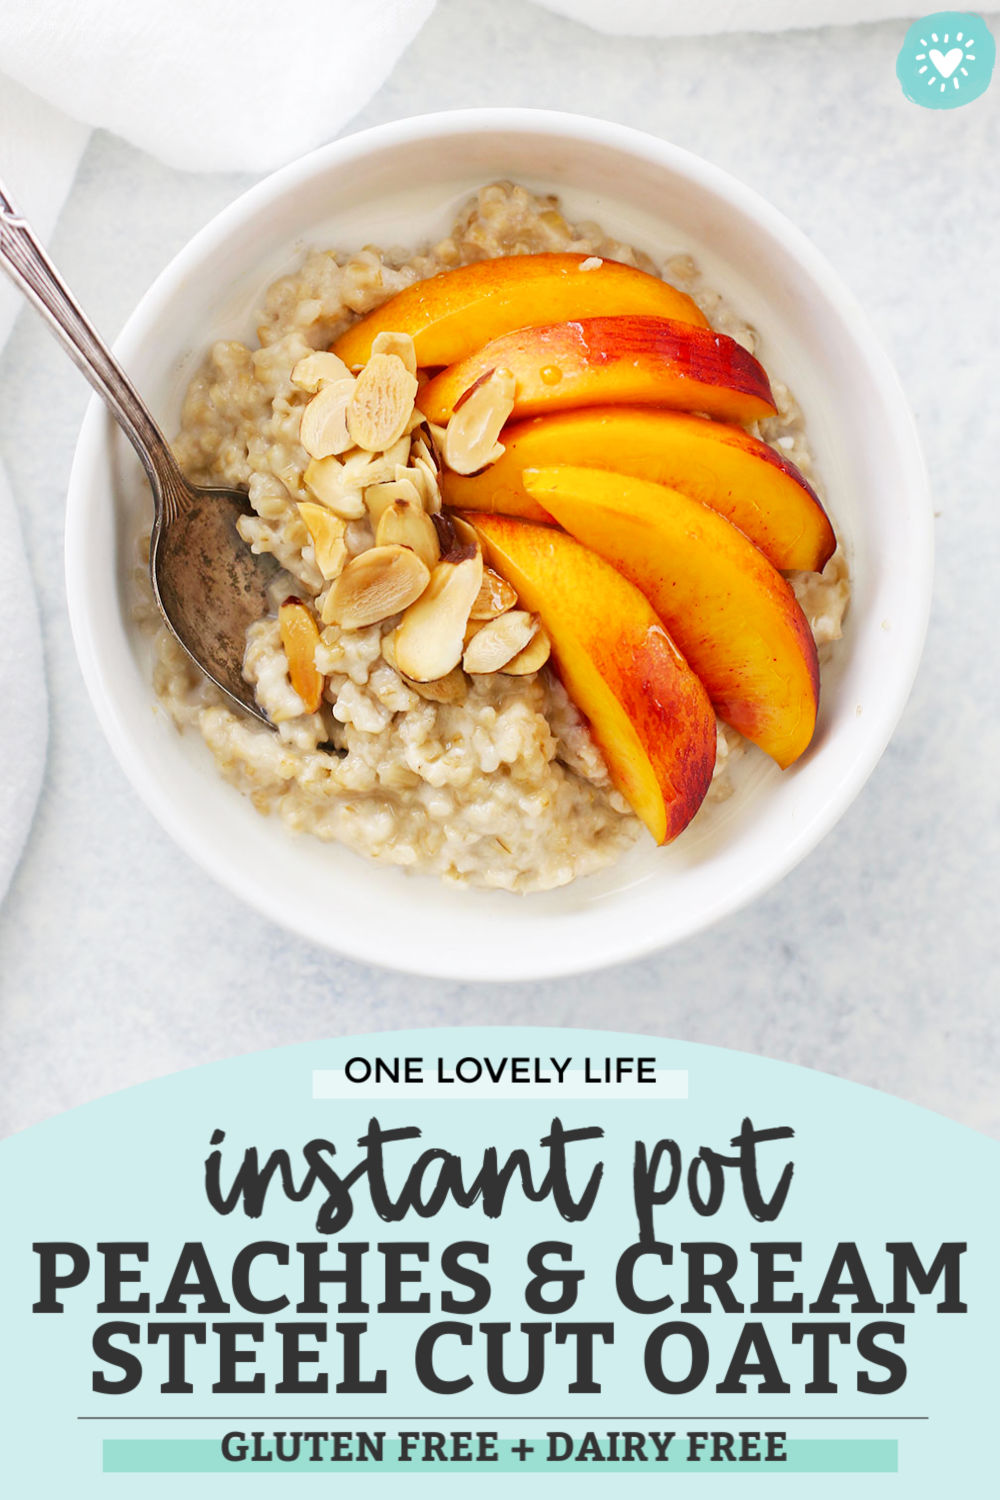 How to Make Instant Pot Steel Cut Oats + 7 Flavors to Try from One Lovely Life